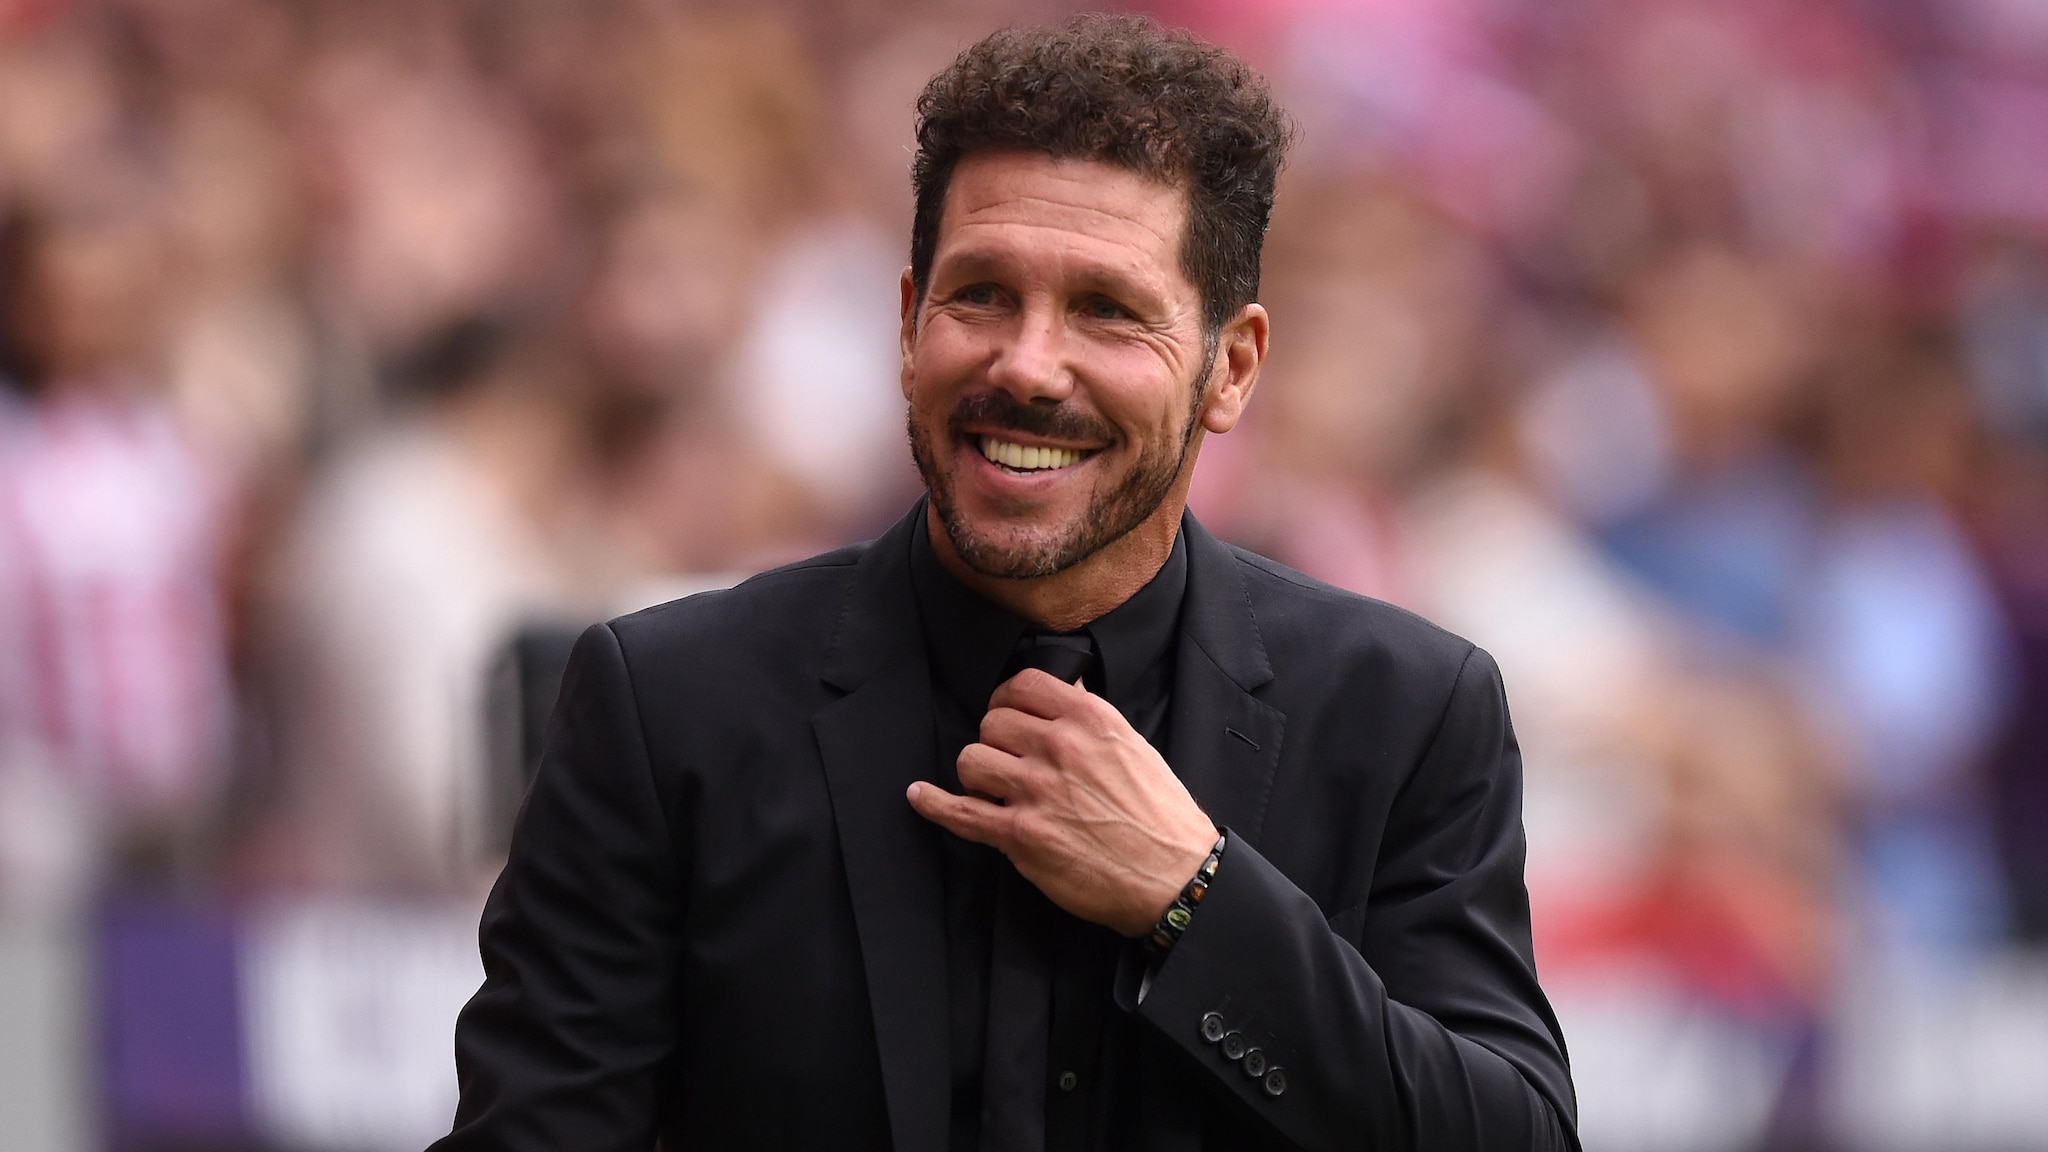 Diego Simeone's 500th game in charge of Atlético: how brilliant is he? |  UEFA Champions League | UEFA.com